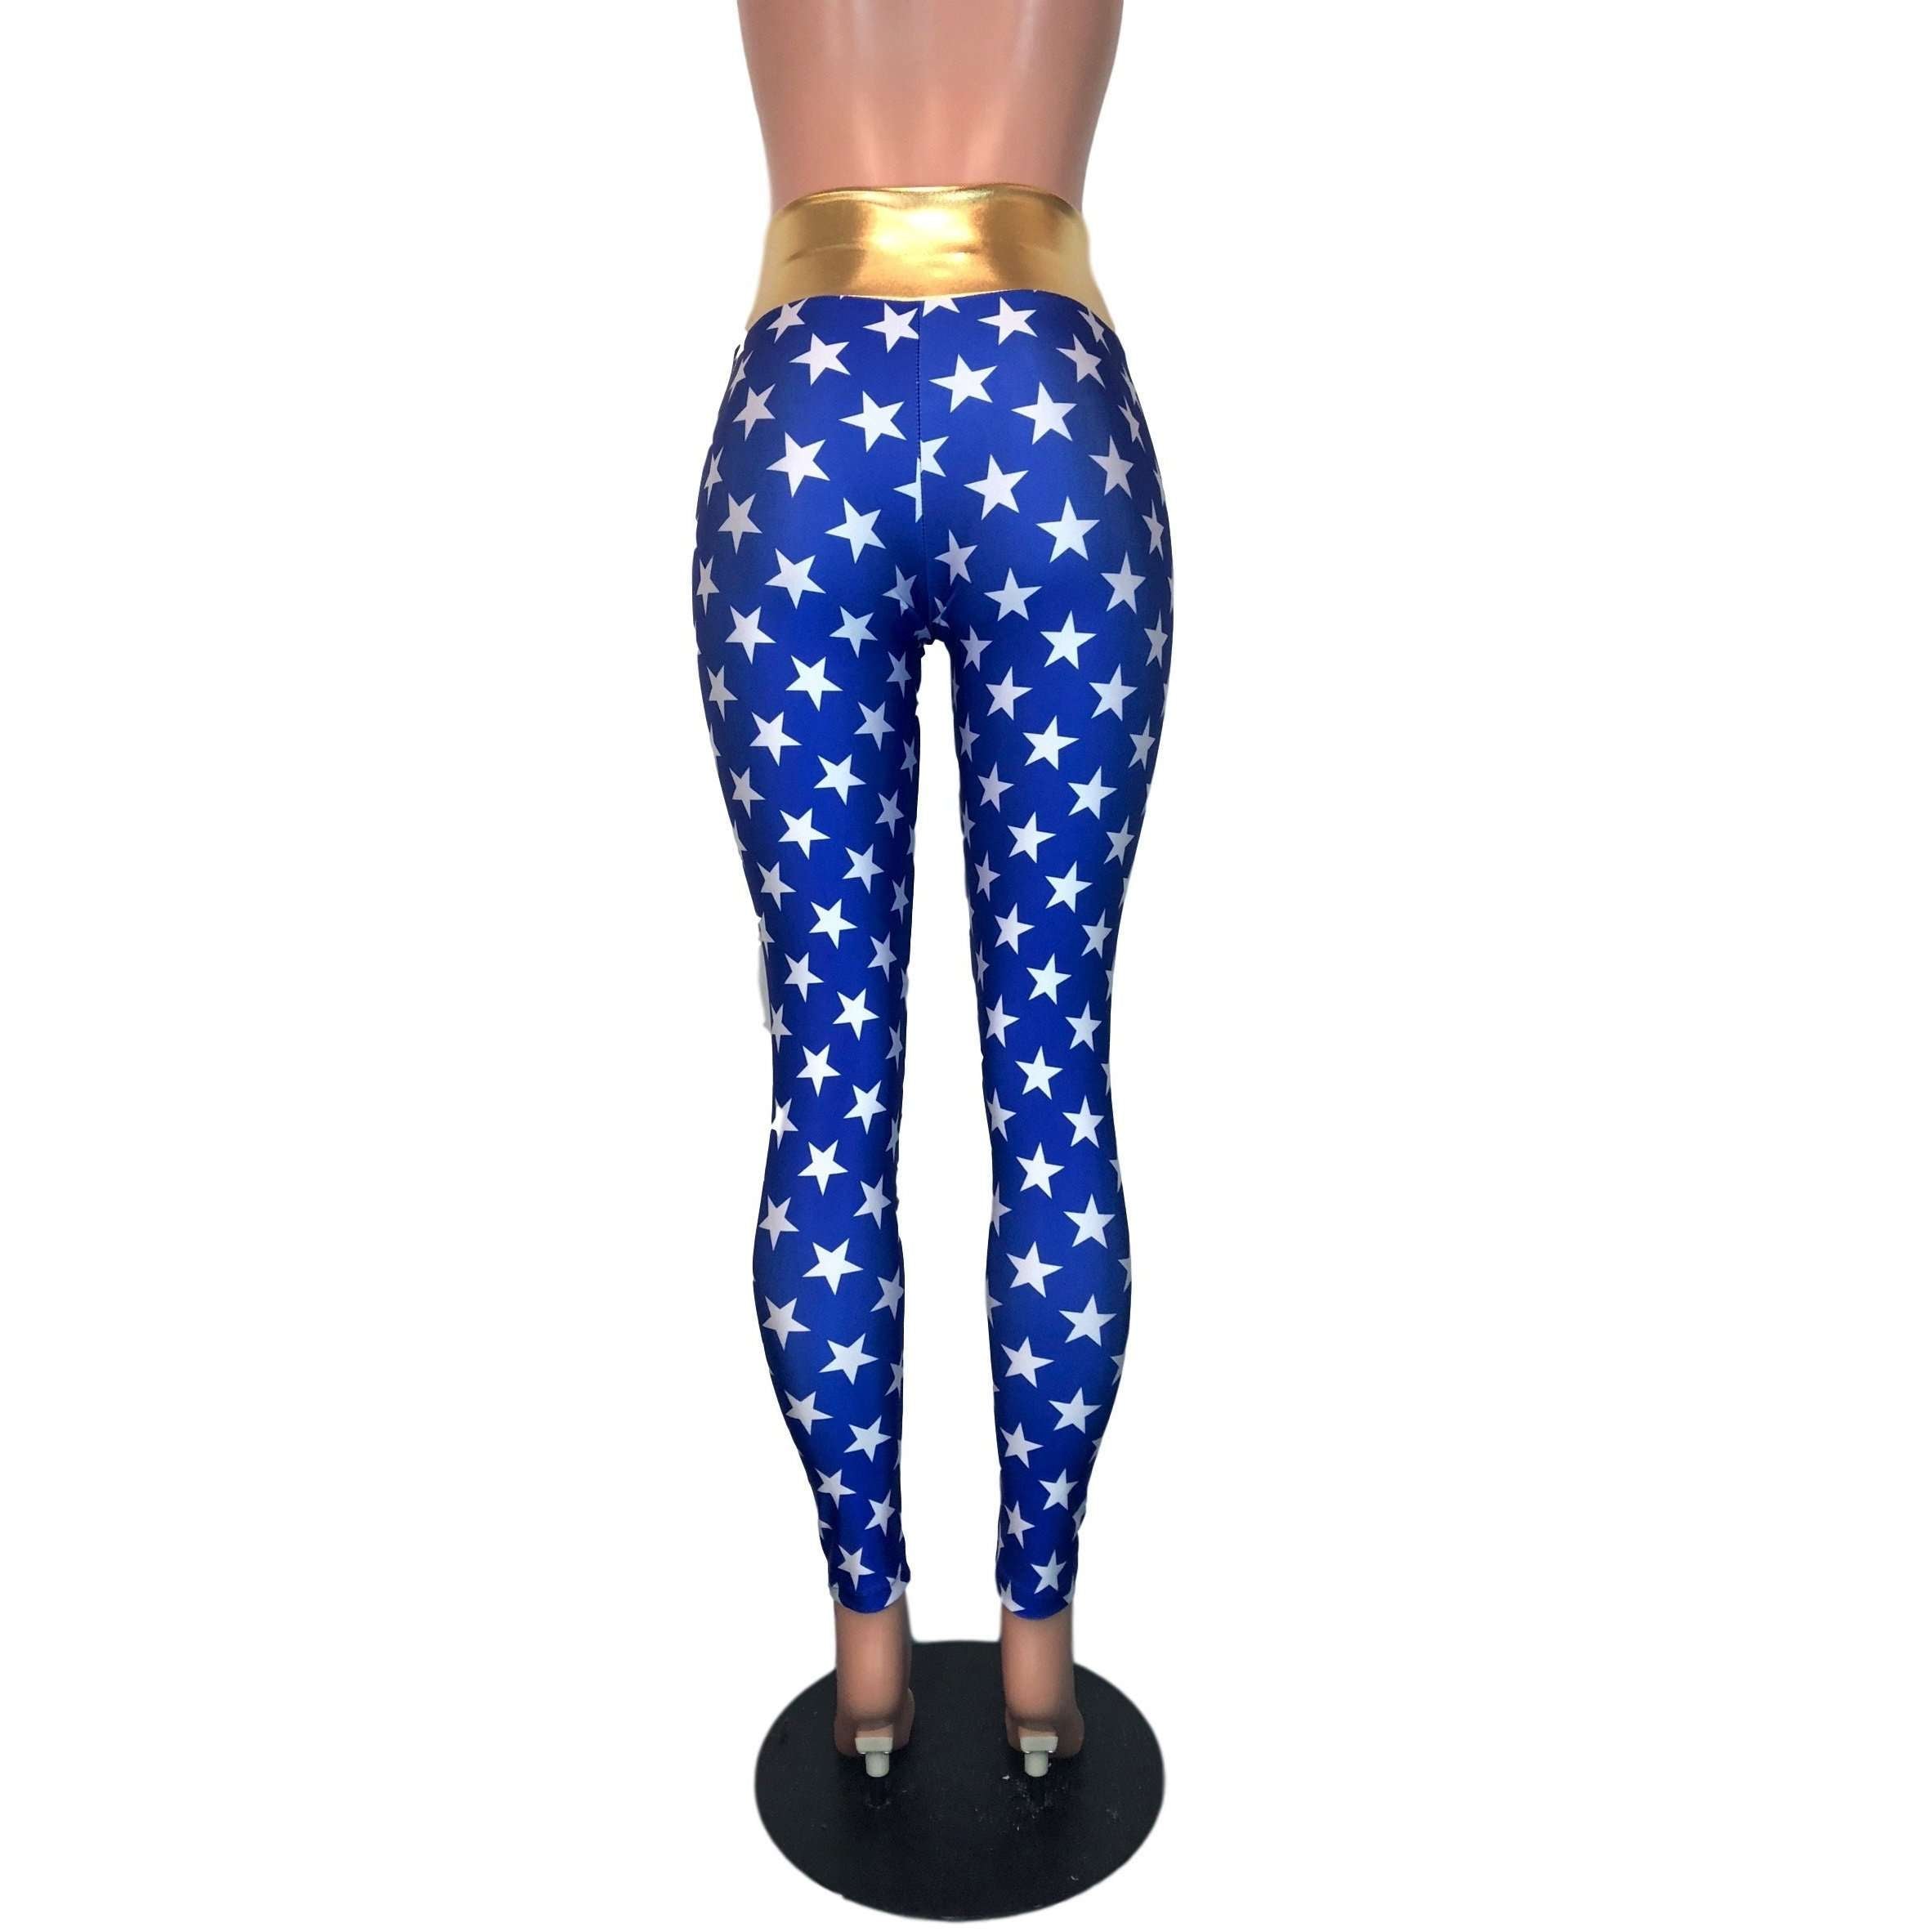 2021 Newest Buteefull Female High Pants Fitness Leggings Wonder Woman  Stretch Pants Exercise Workout Clothes